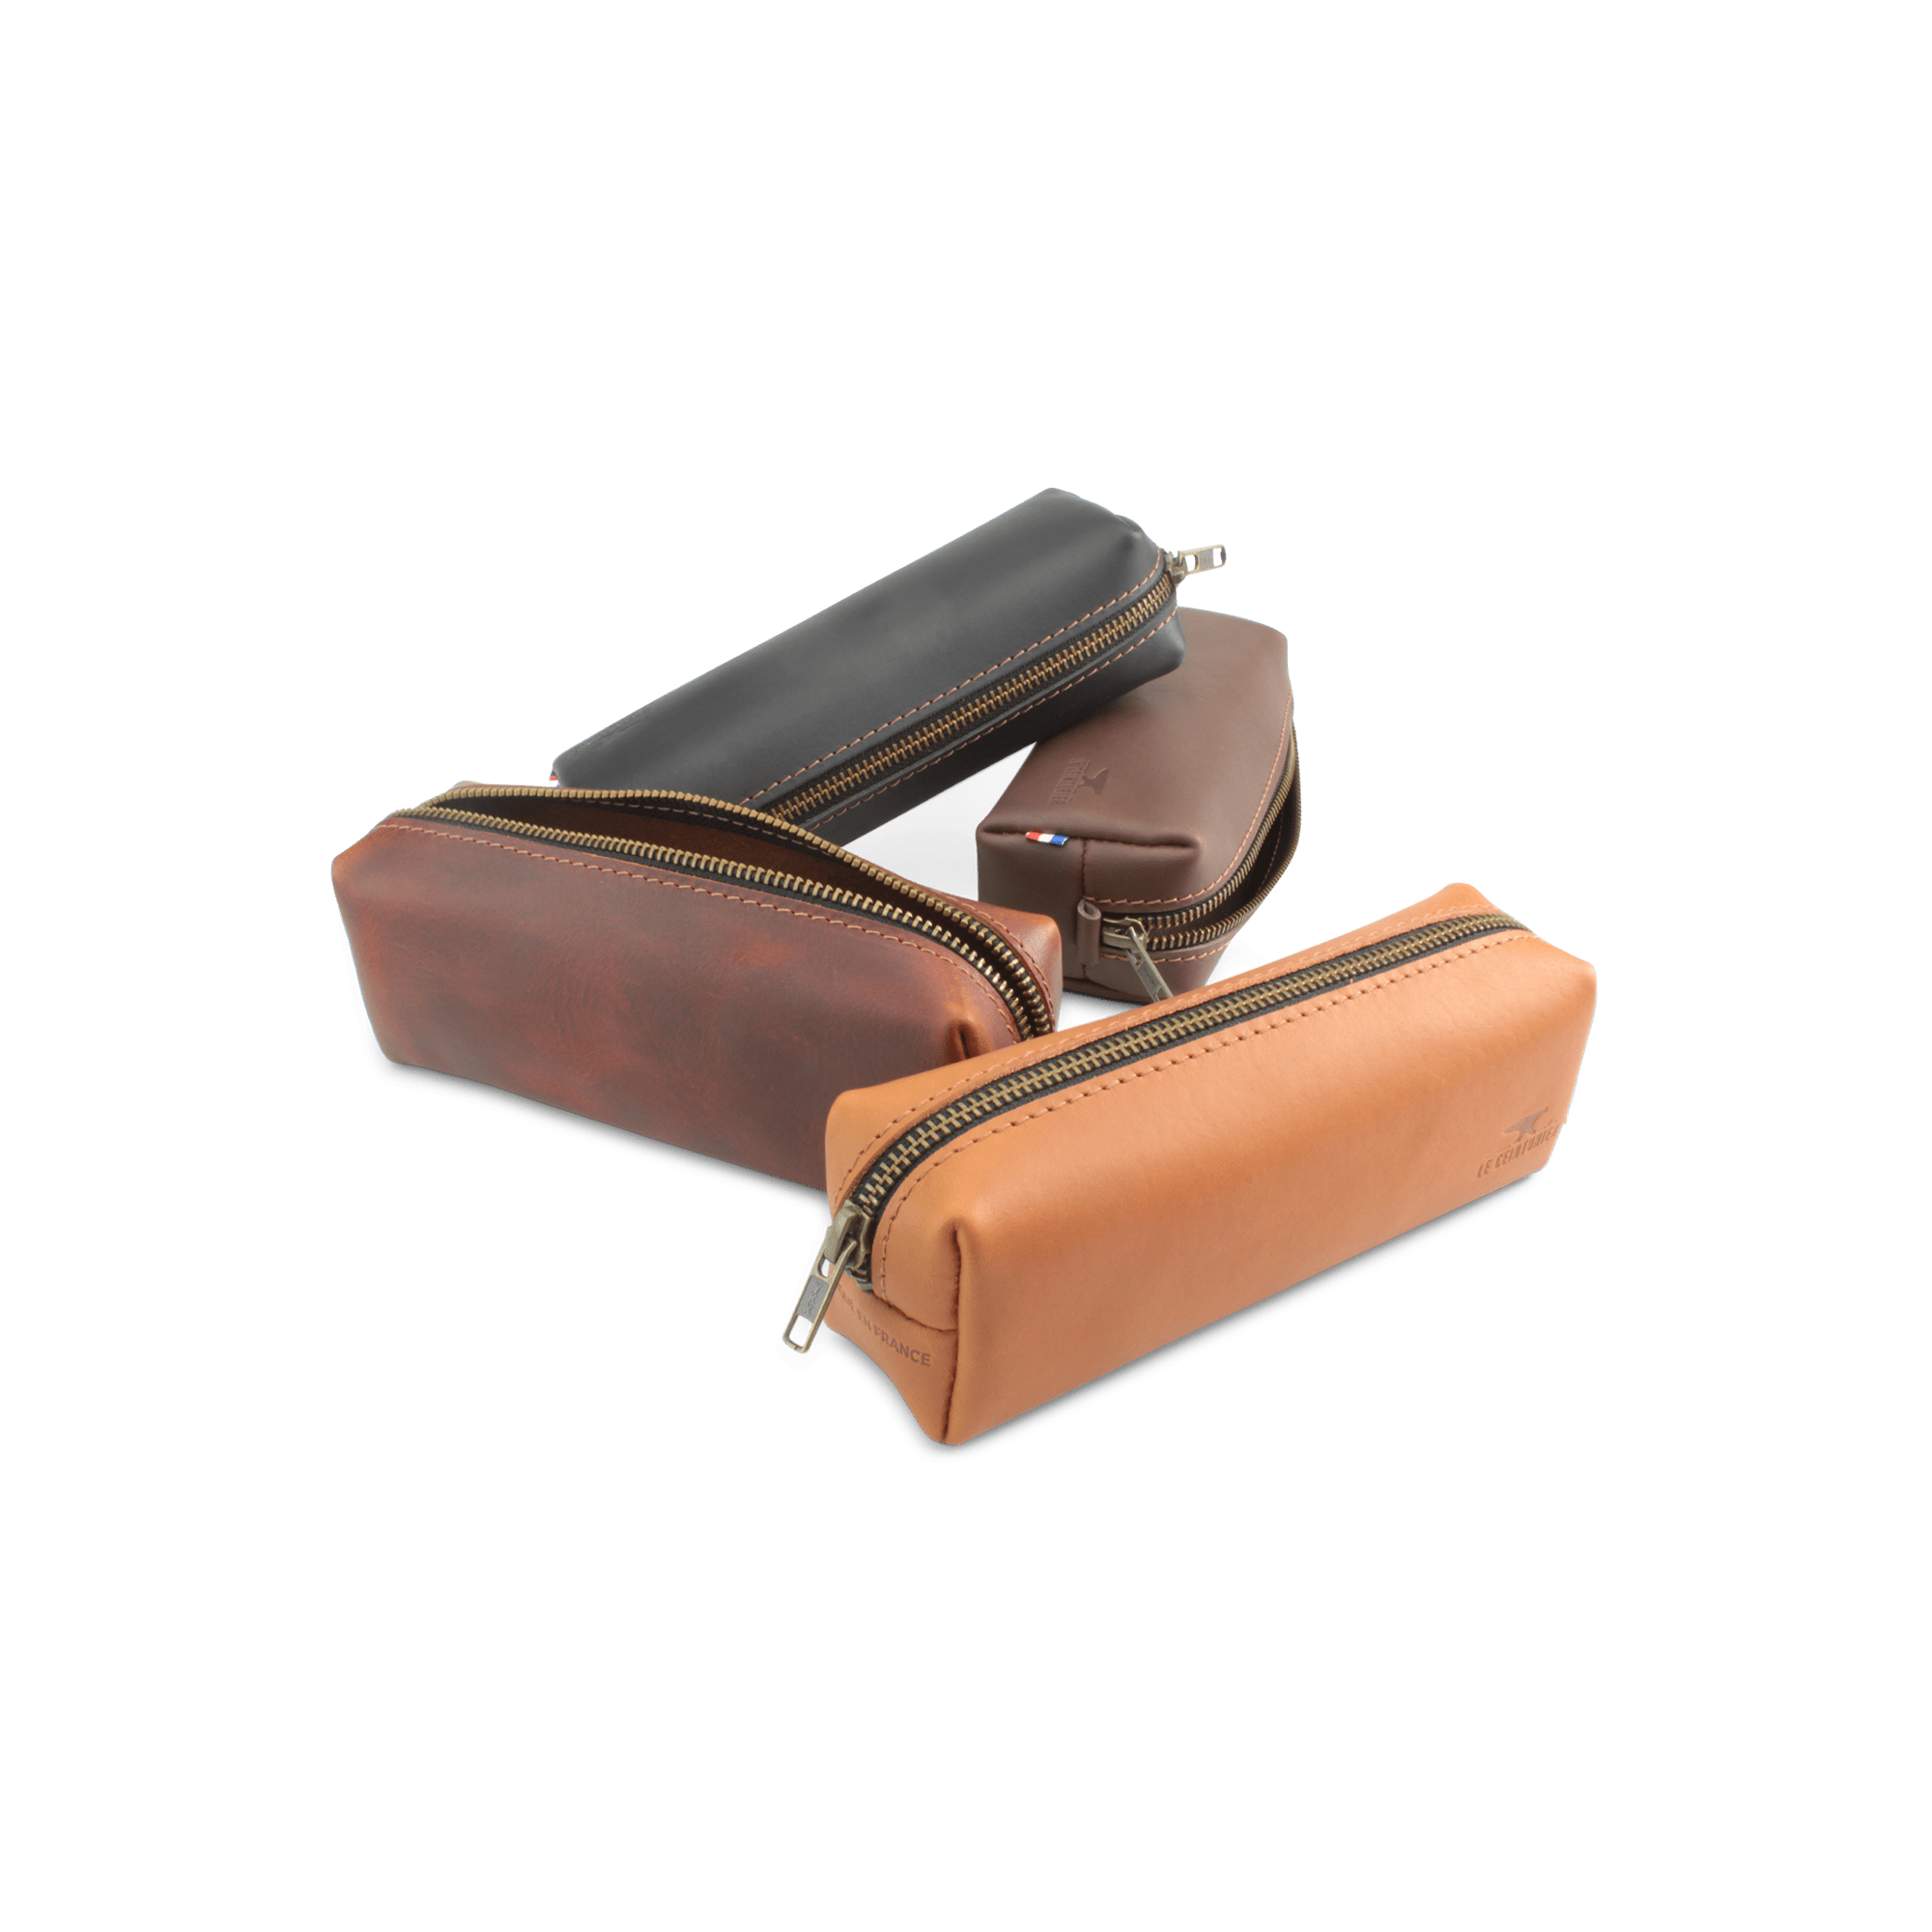 LE CEINTURIER  TROUSSE cuir - Maroquinerie Made In France